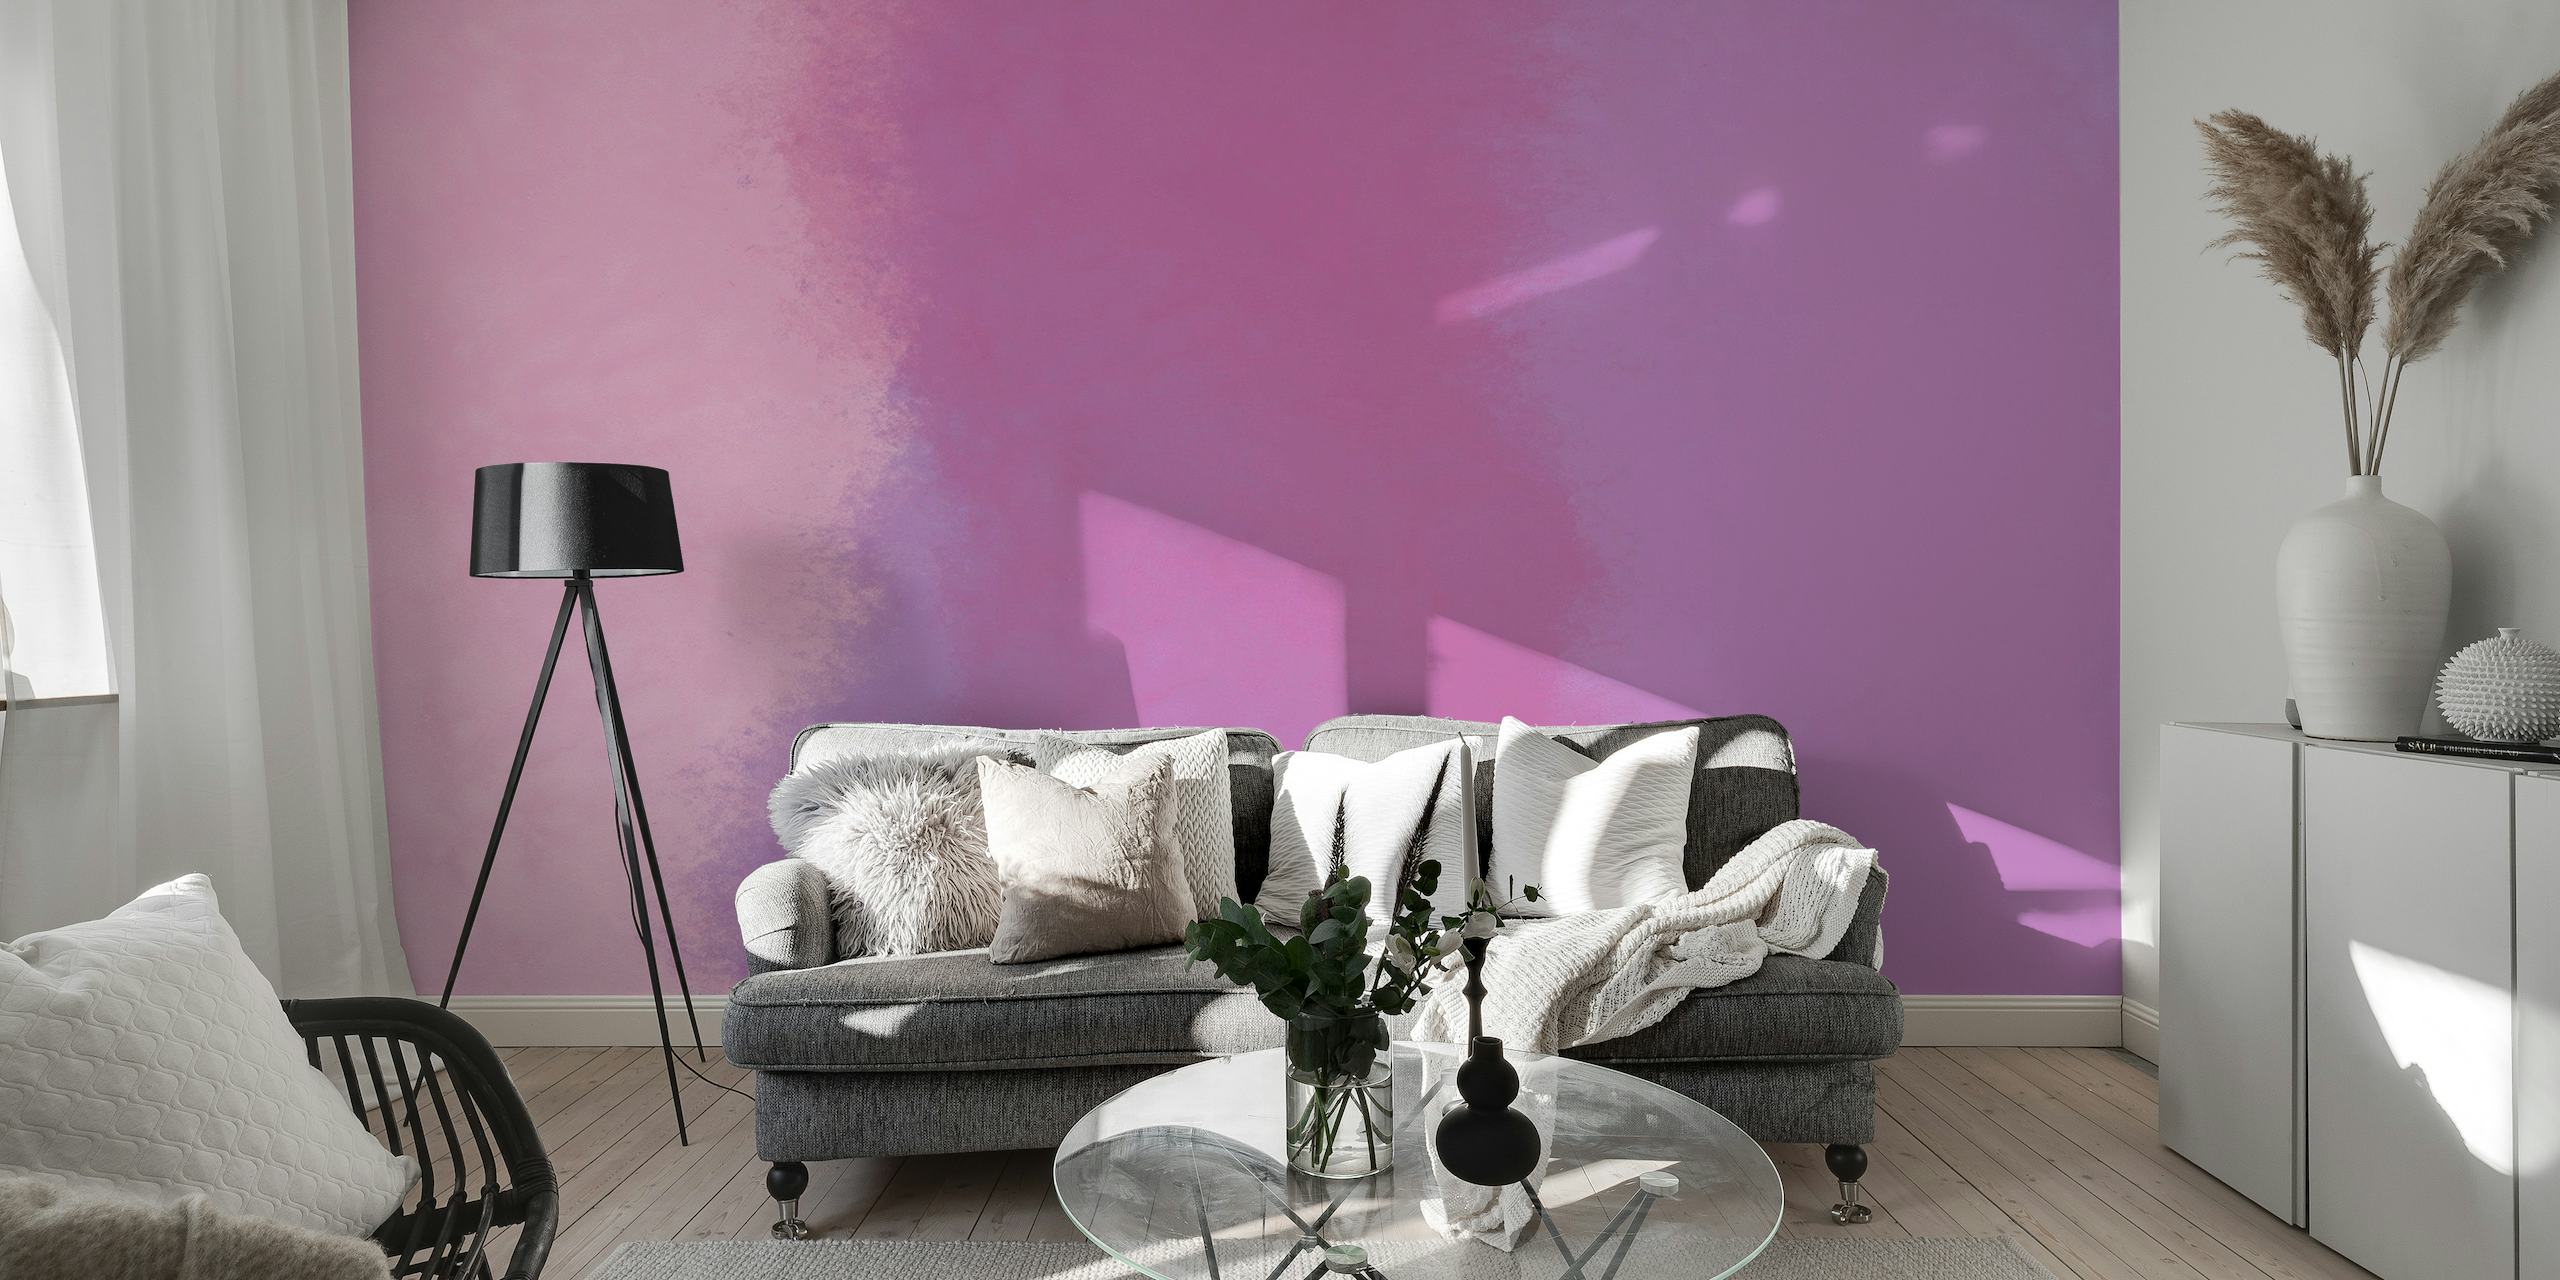 A soft-focus wall mural with shades of pink resembling rose petals